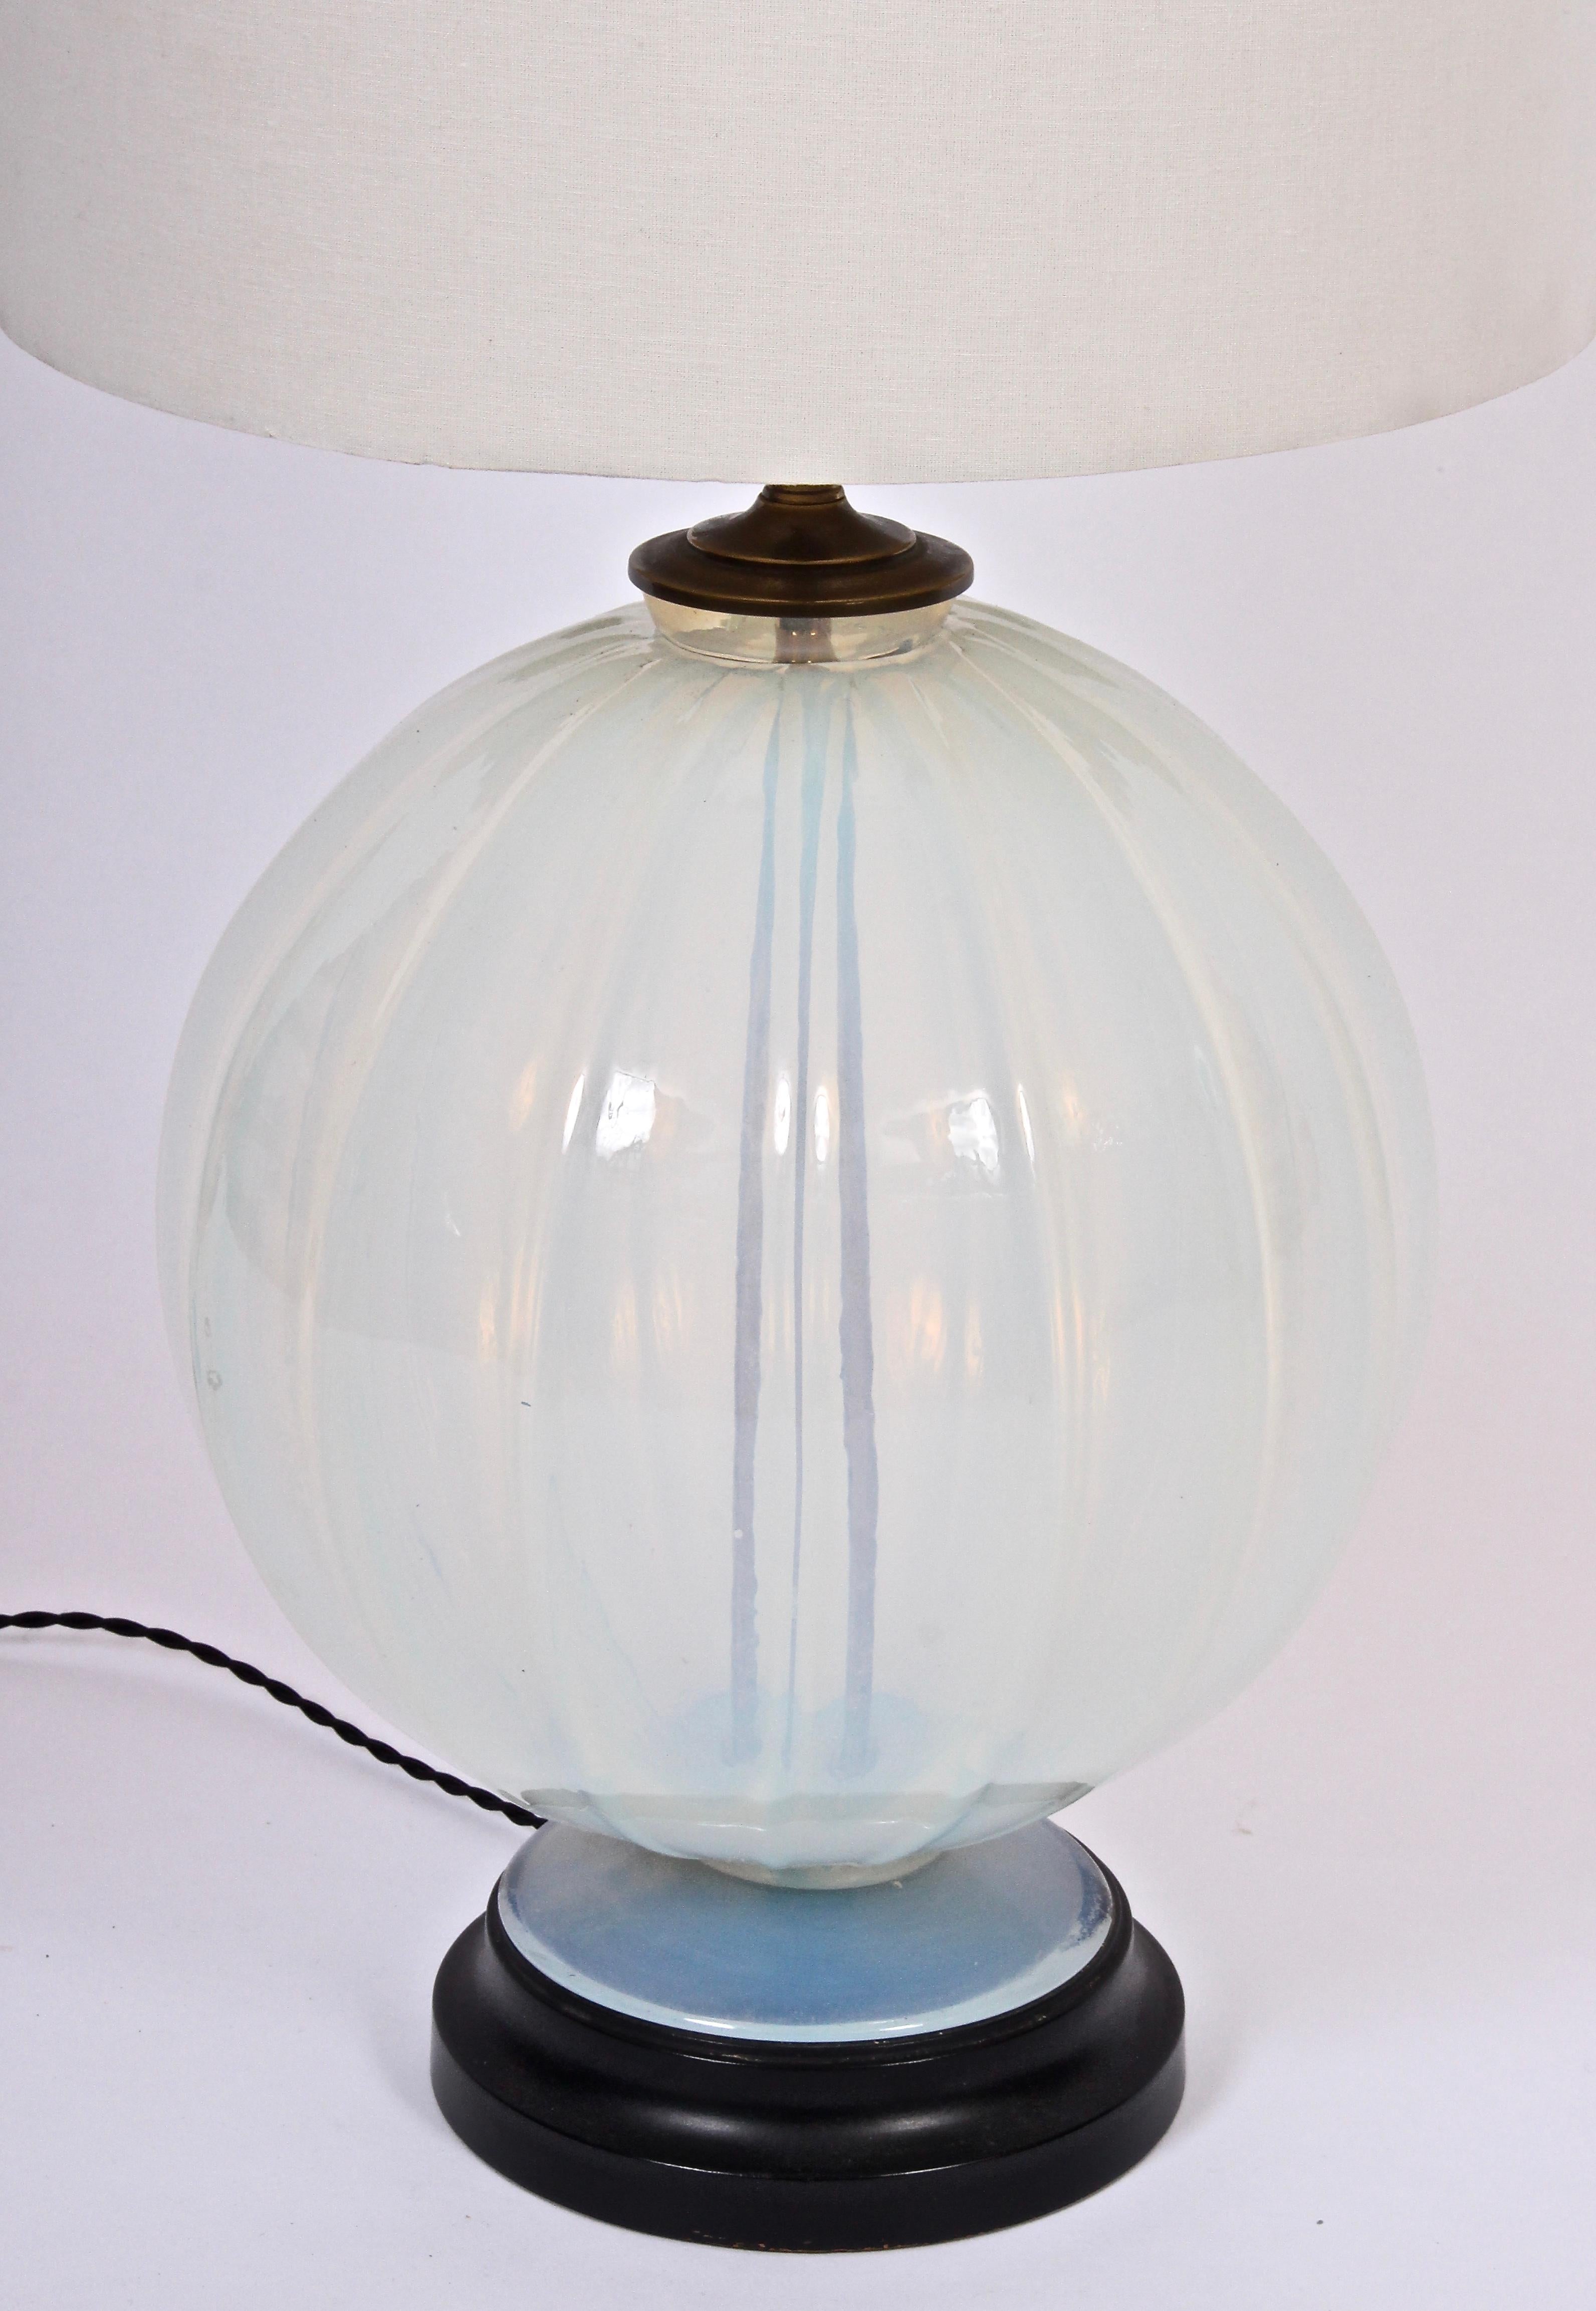 Early 20th Century Marius Ernest Sabino translucent opaline art glass table lamp.  Round on black enameled base with brass details. Shade shown for display only (13 H x 13.5 D top x 14 D bottom). Adjustable double sockets. 